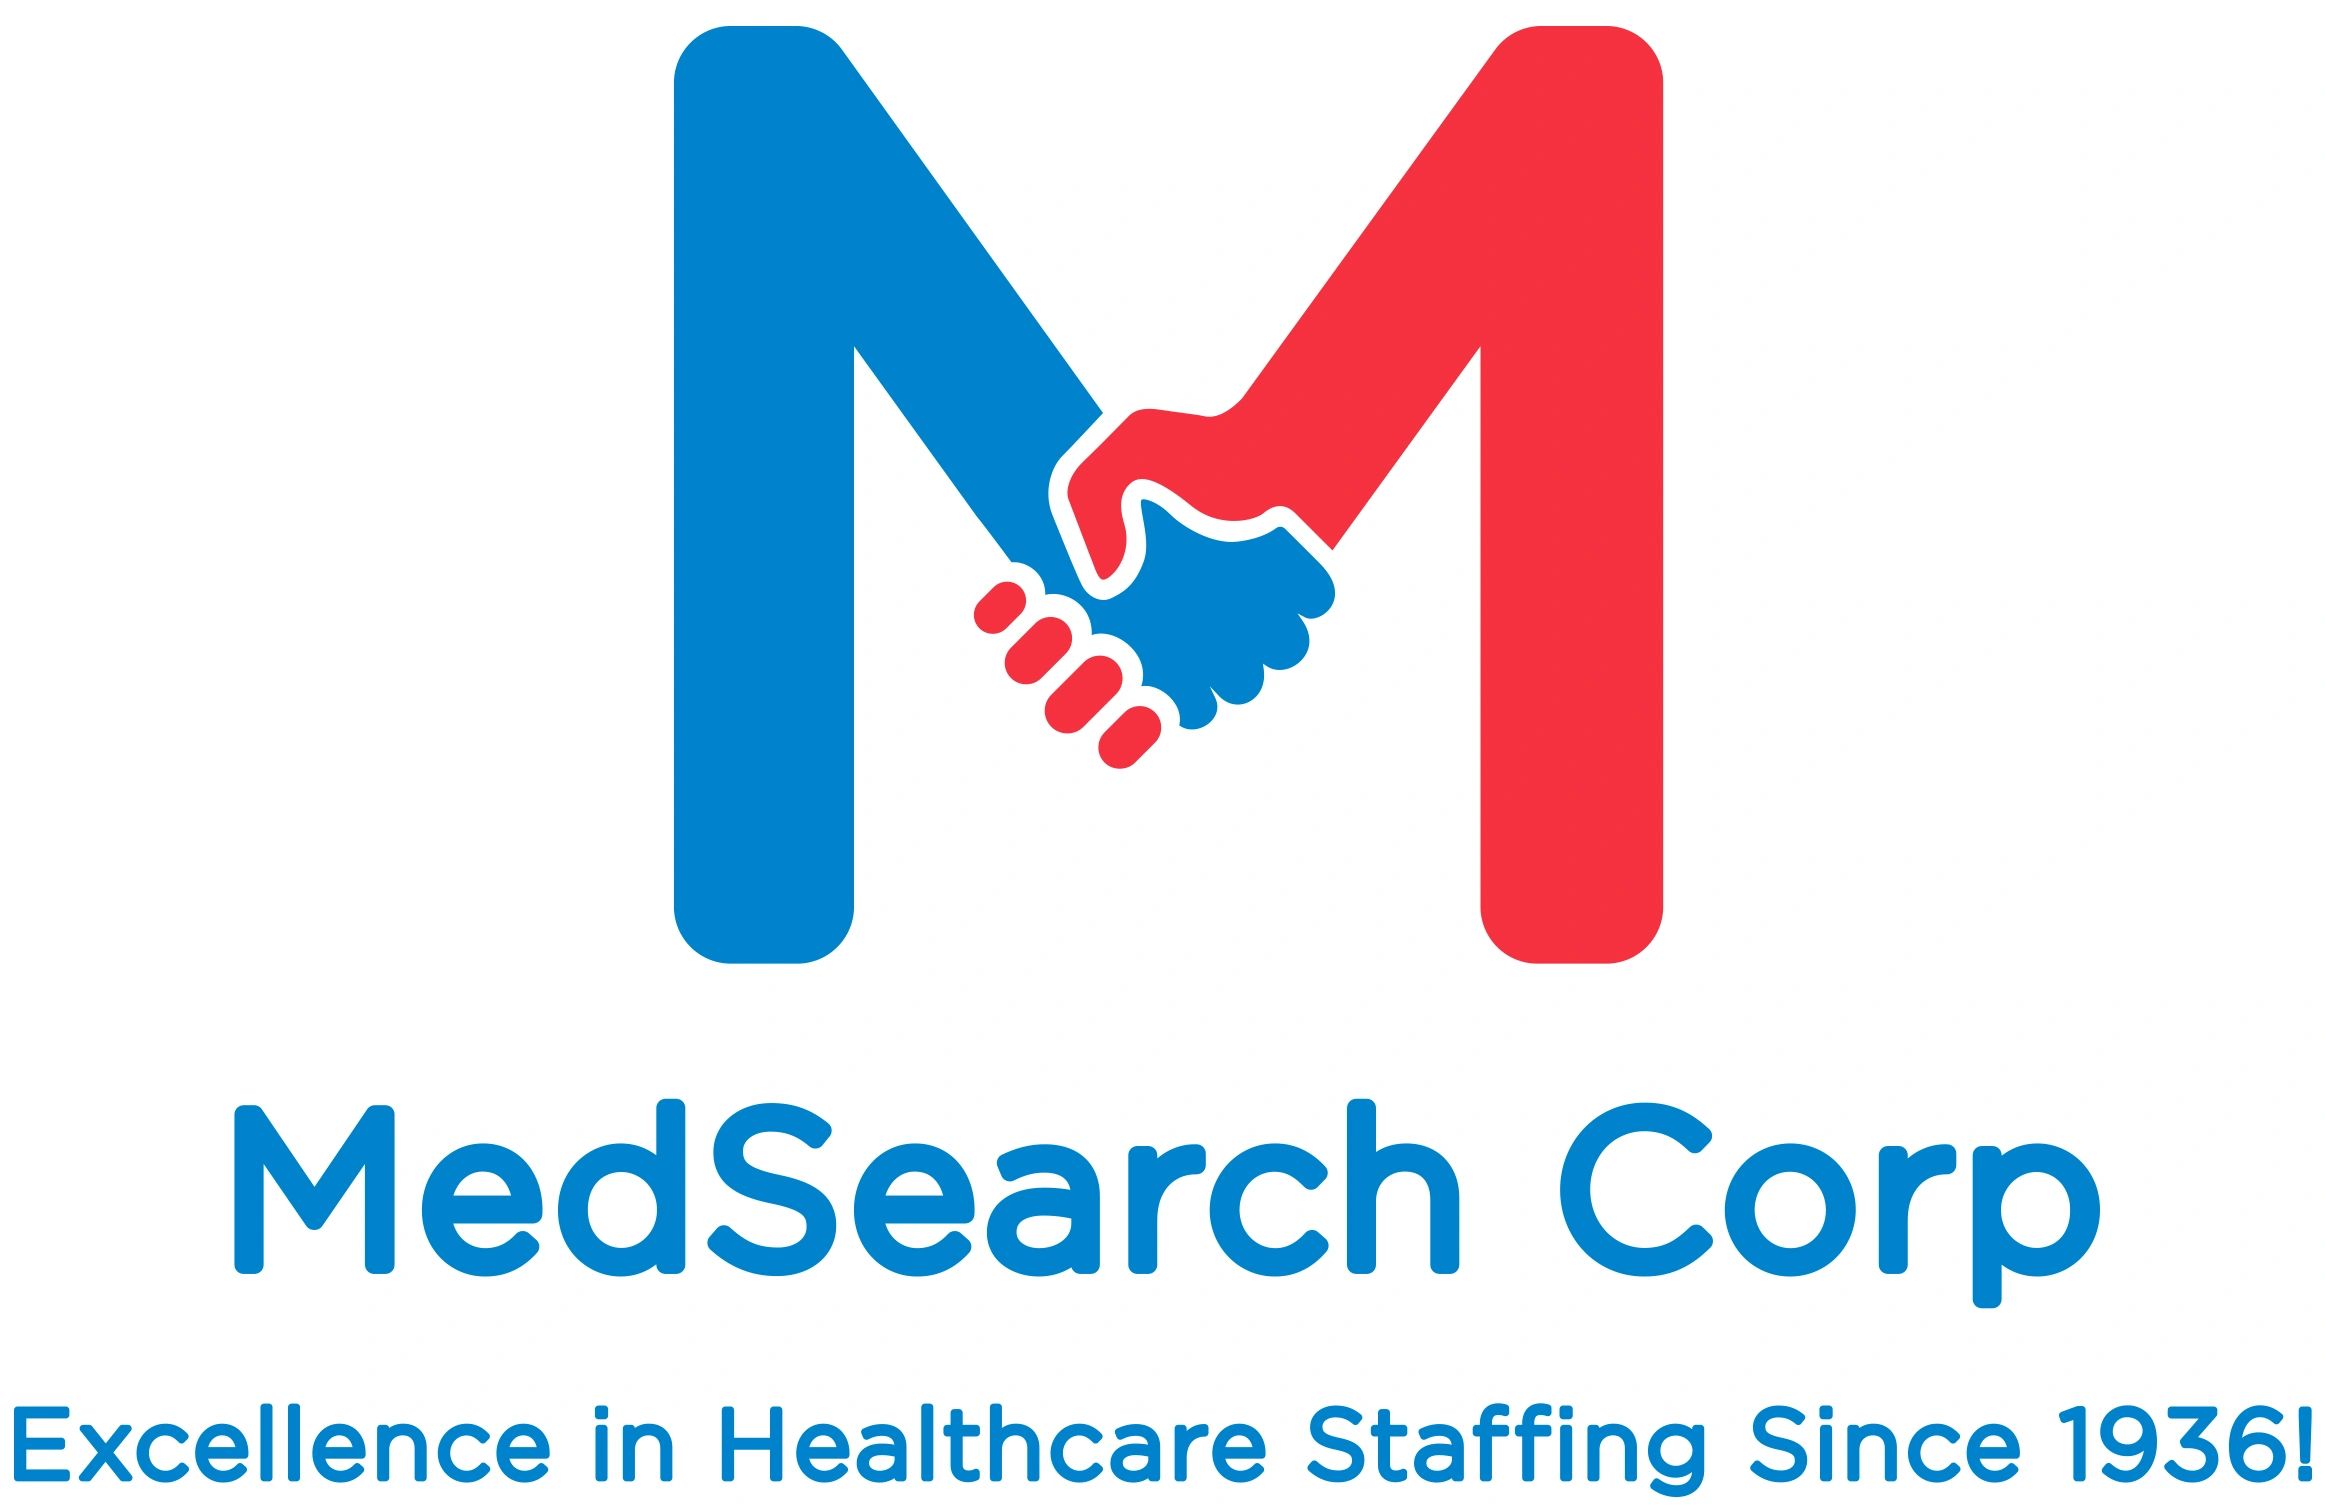 Medsearch Corp